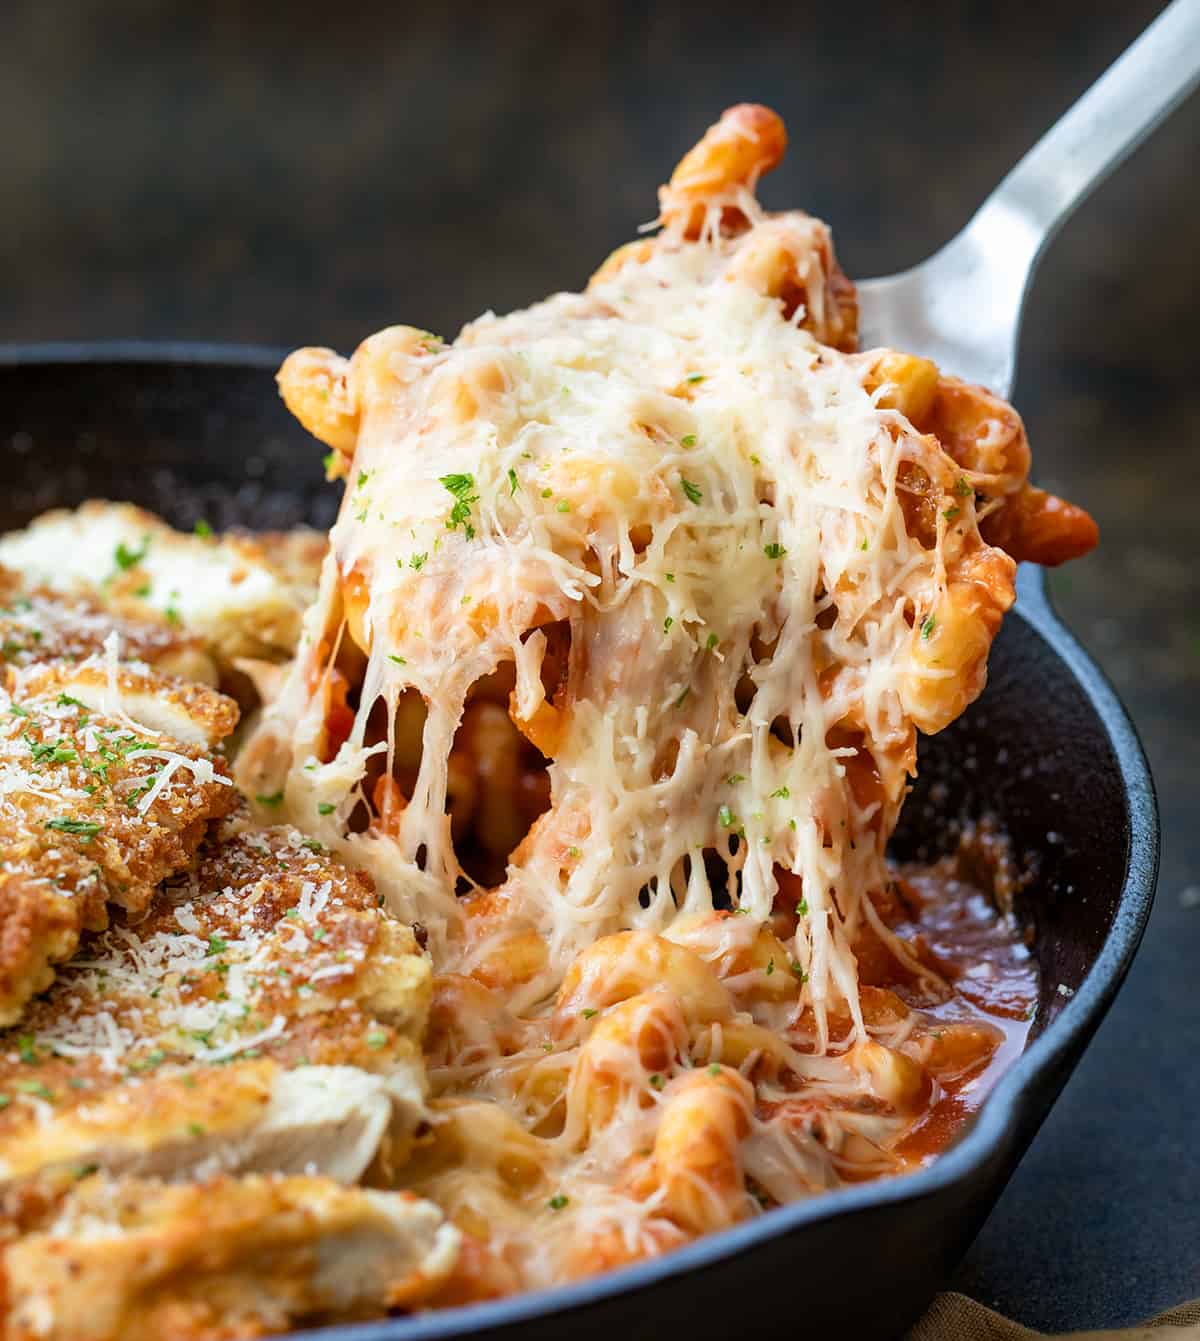 Cheesy Scoop of Parmesan Chicken Pasta from the Skillet.